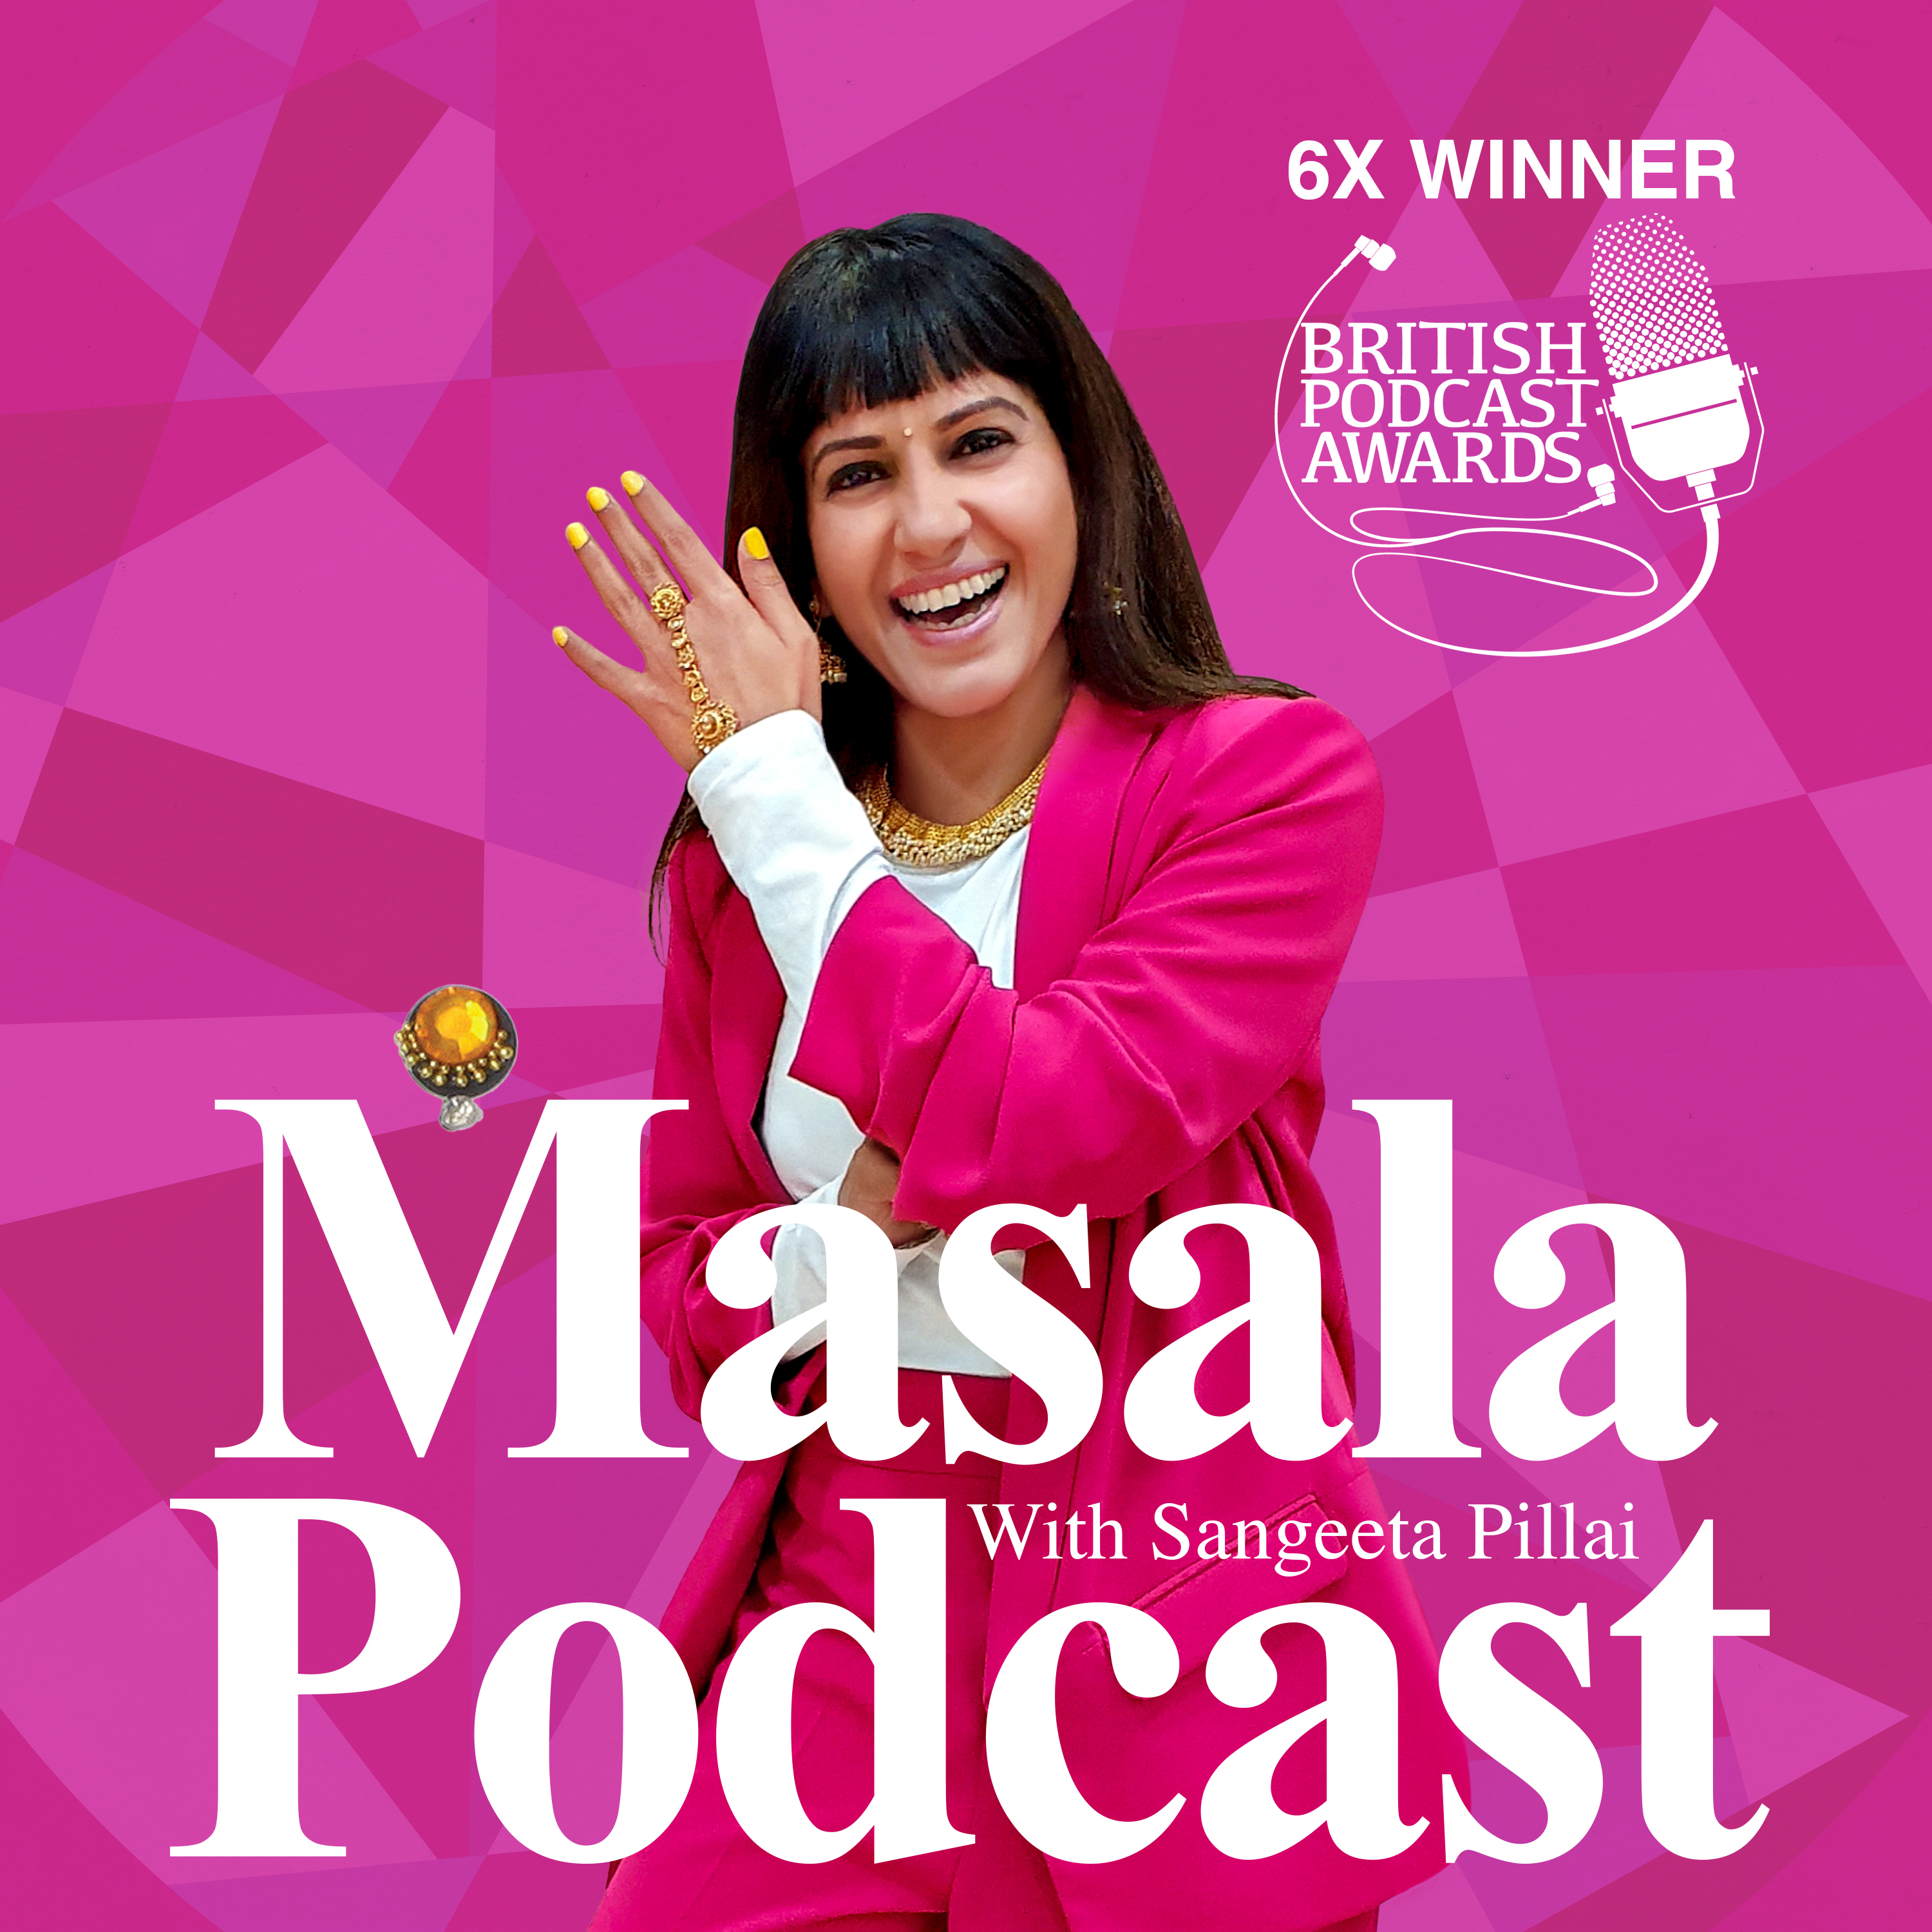 Masala Podcast - S 2, Ep 1 - Being a South Asian Woman